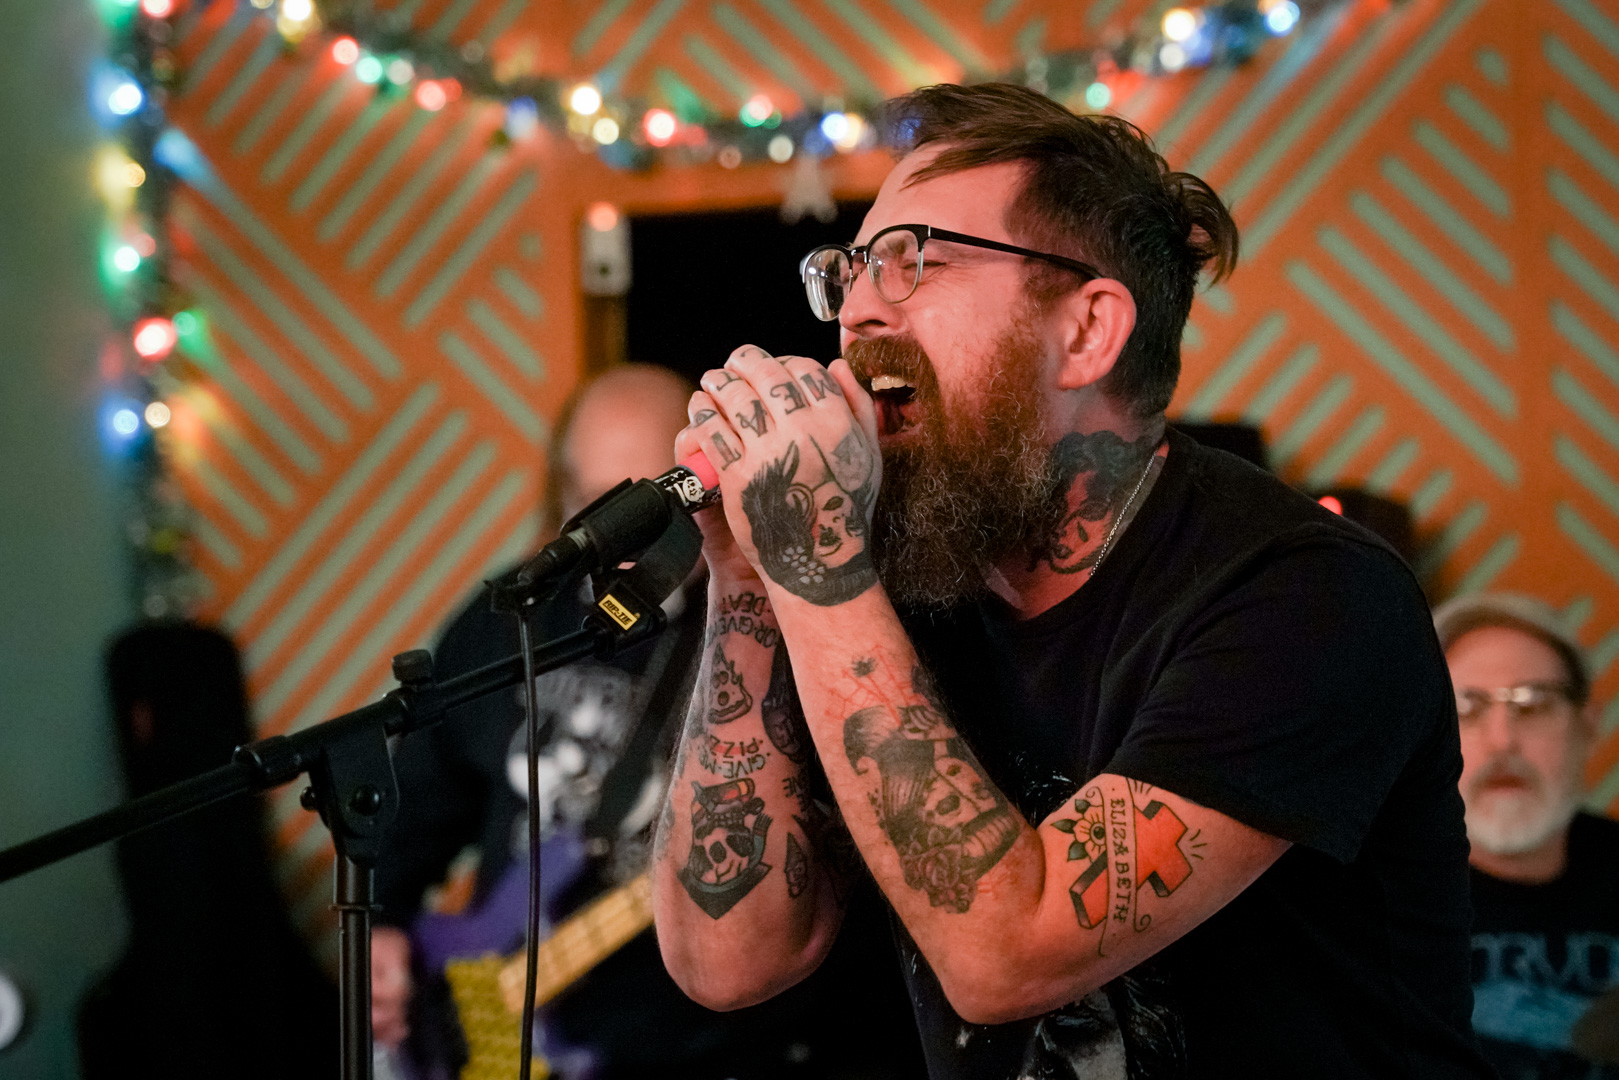 A man with tattoos sings passionately into a microphone 